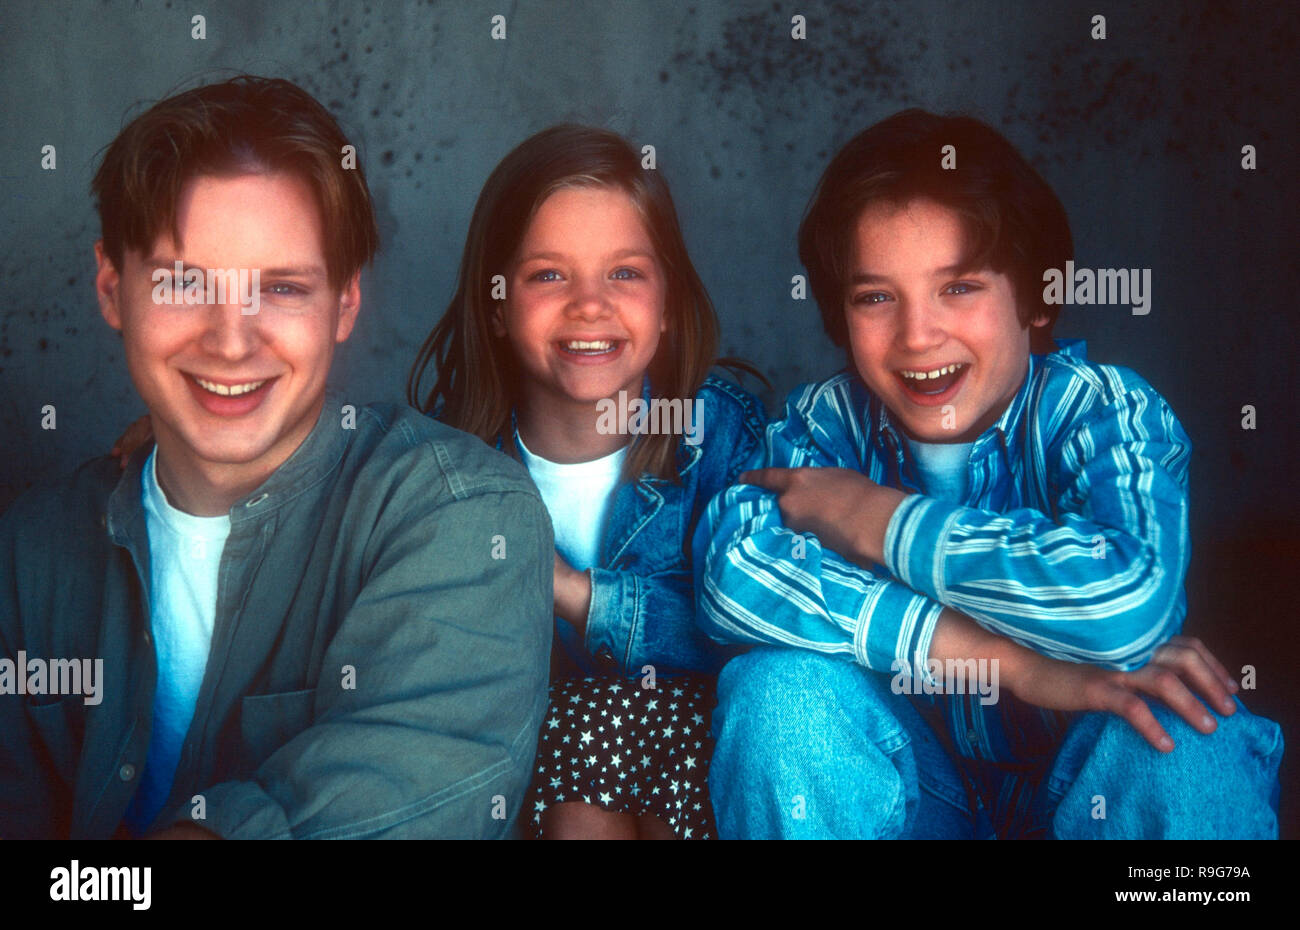 LOS ANGELES, CA -JUNE 6: (EXCLUSIVE) Actor Zack Wood, sister actress Hannah Wood and brother actor Elijah Wood pose at a photo shoot on June 6, 1993 in Los Angeles, California. Photo by Barry King/Alamy Stock Photo Stock Photo